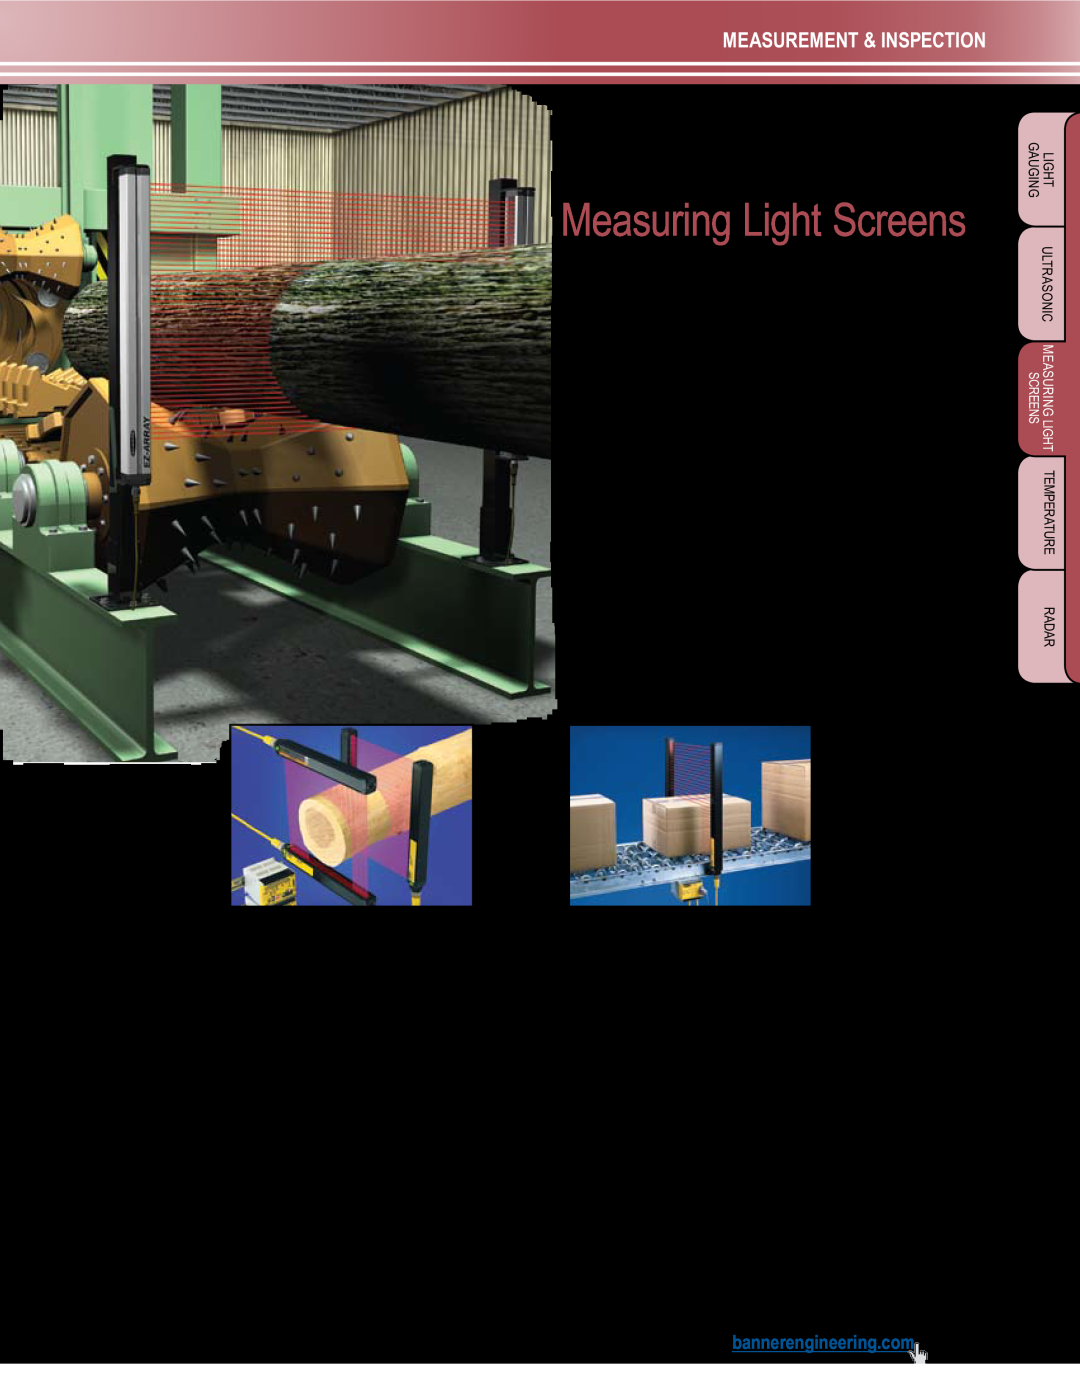 Banner L-GAGE manual A-Gage, Measuring Light Screens, Measurement & Inspection 